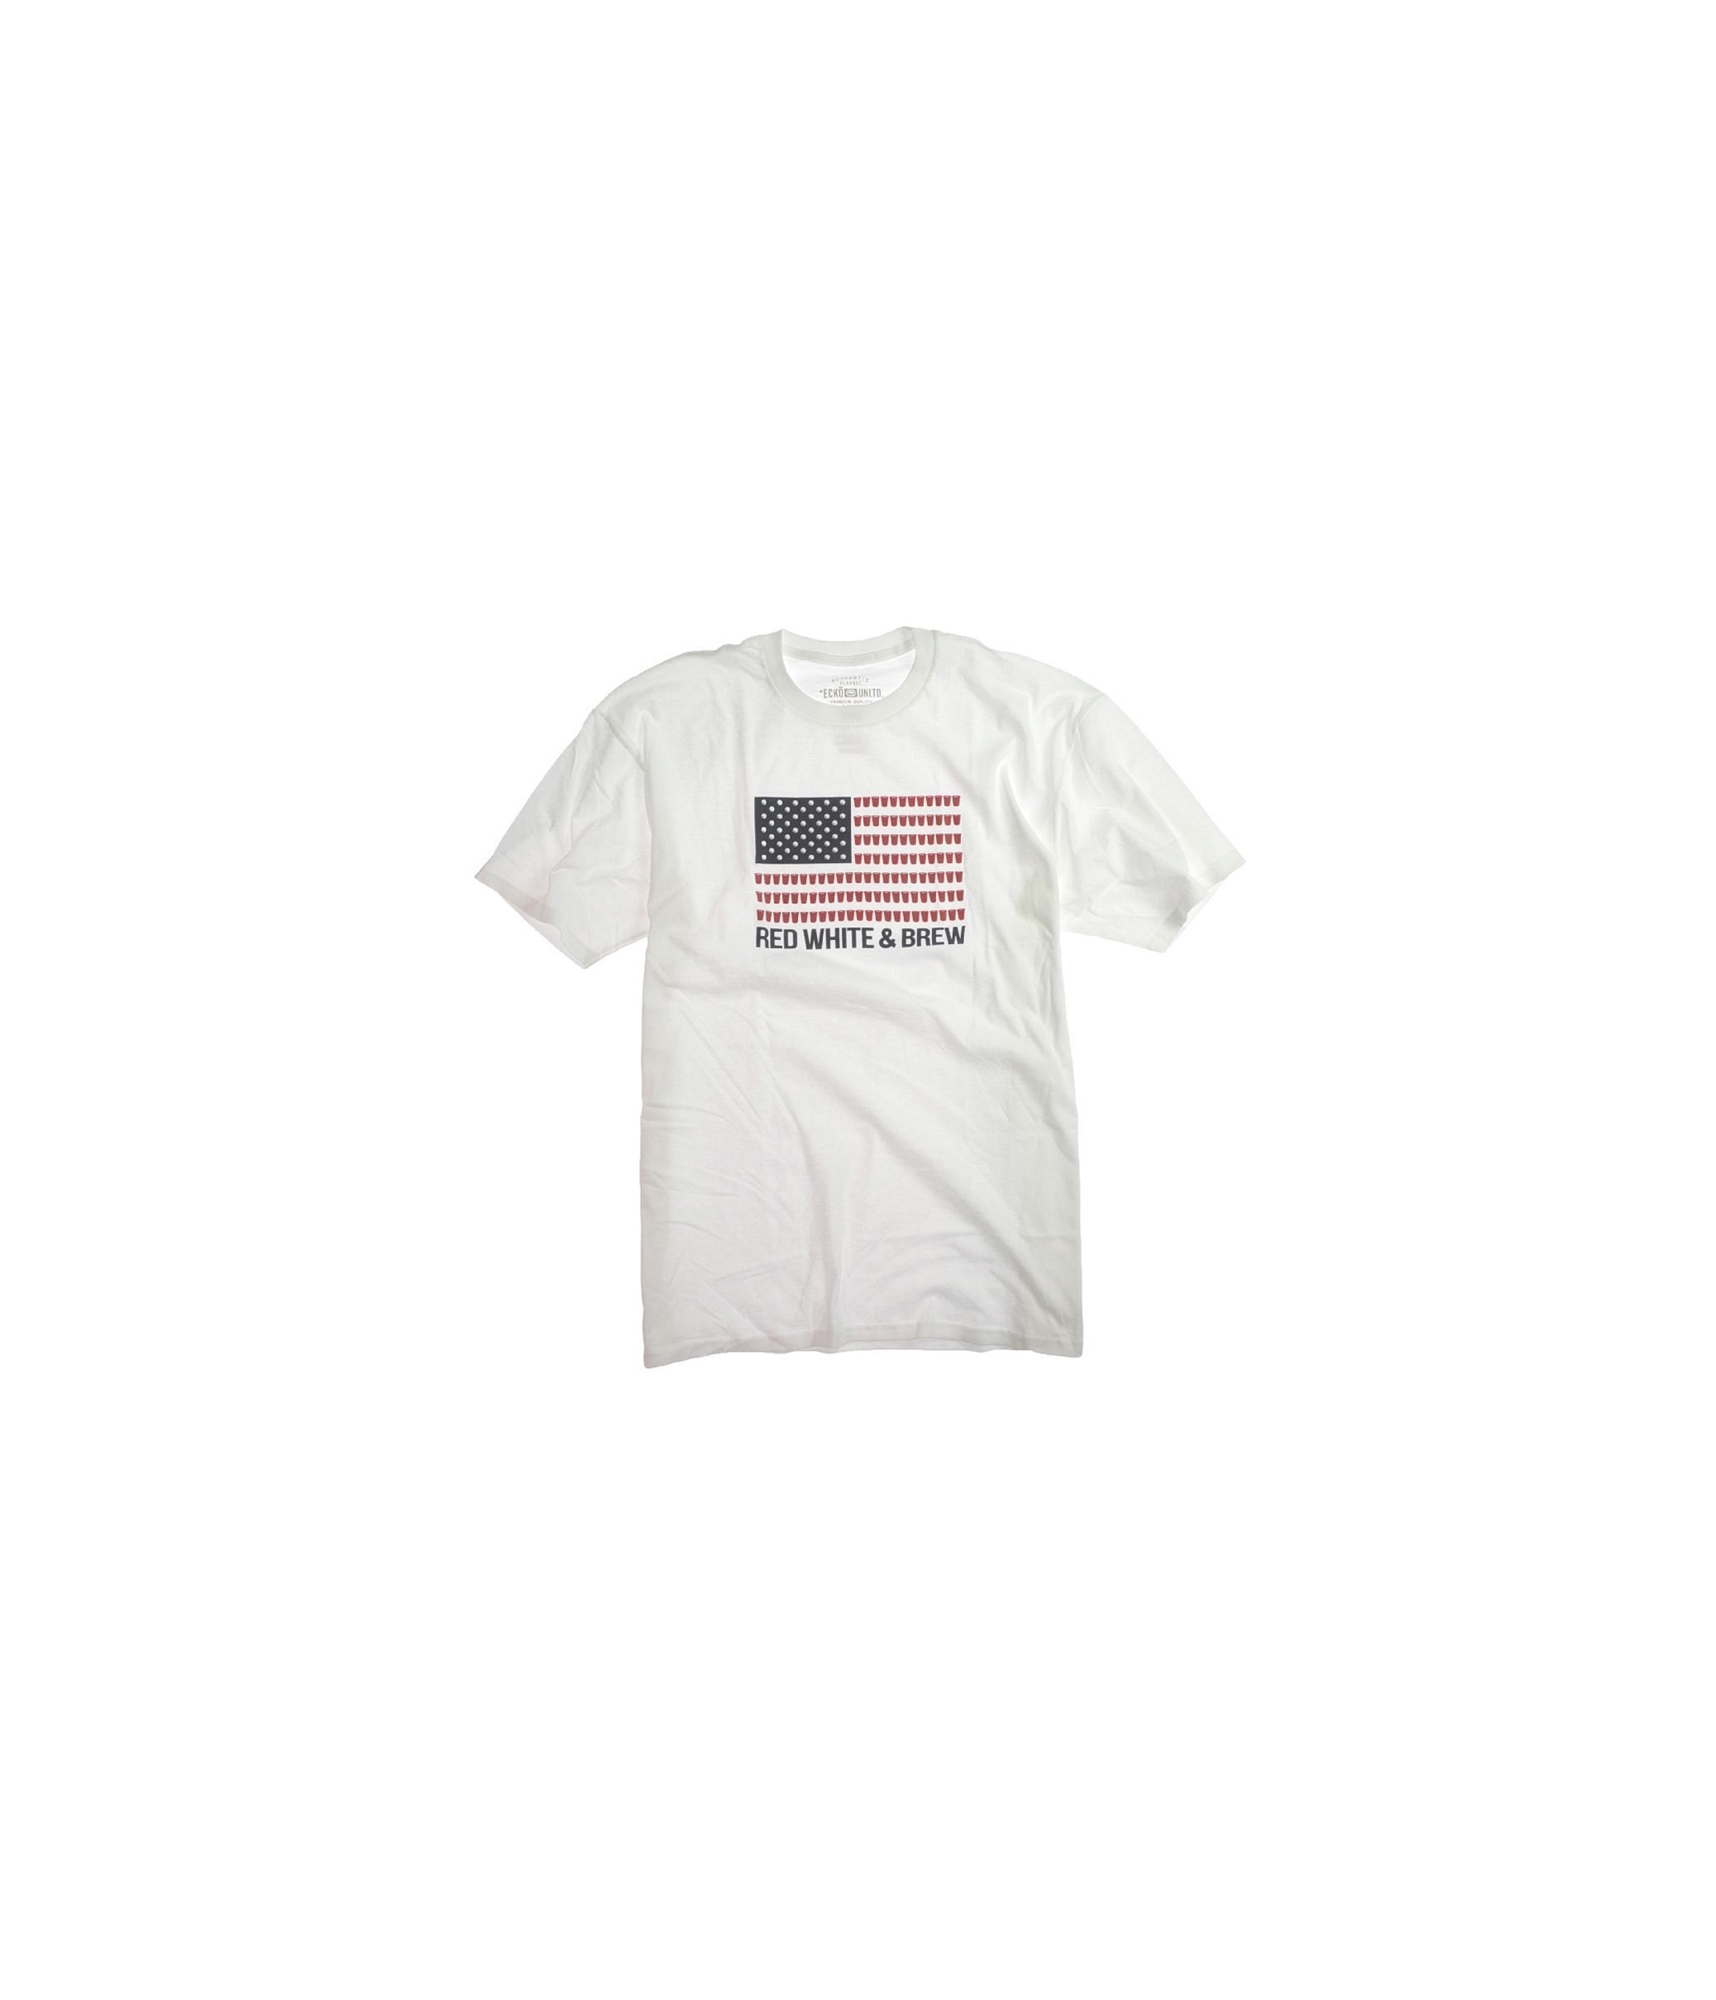 Buy a Ecko Unltd. Mens White And Brew Graphic T-Shirt | Tagsweekly